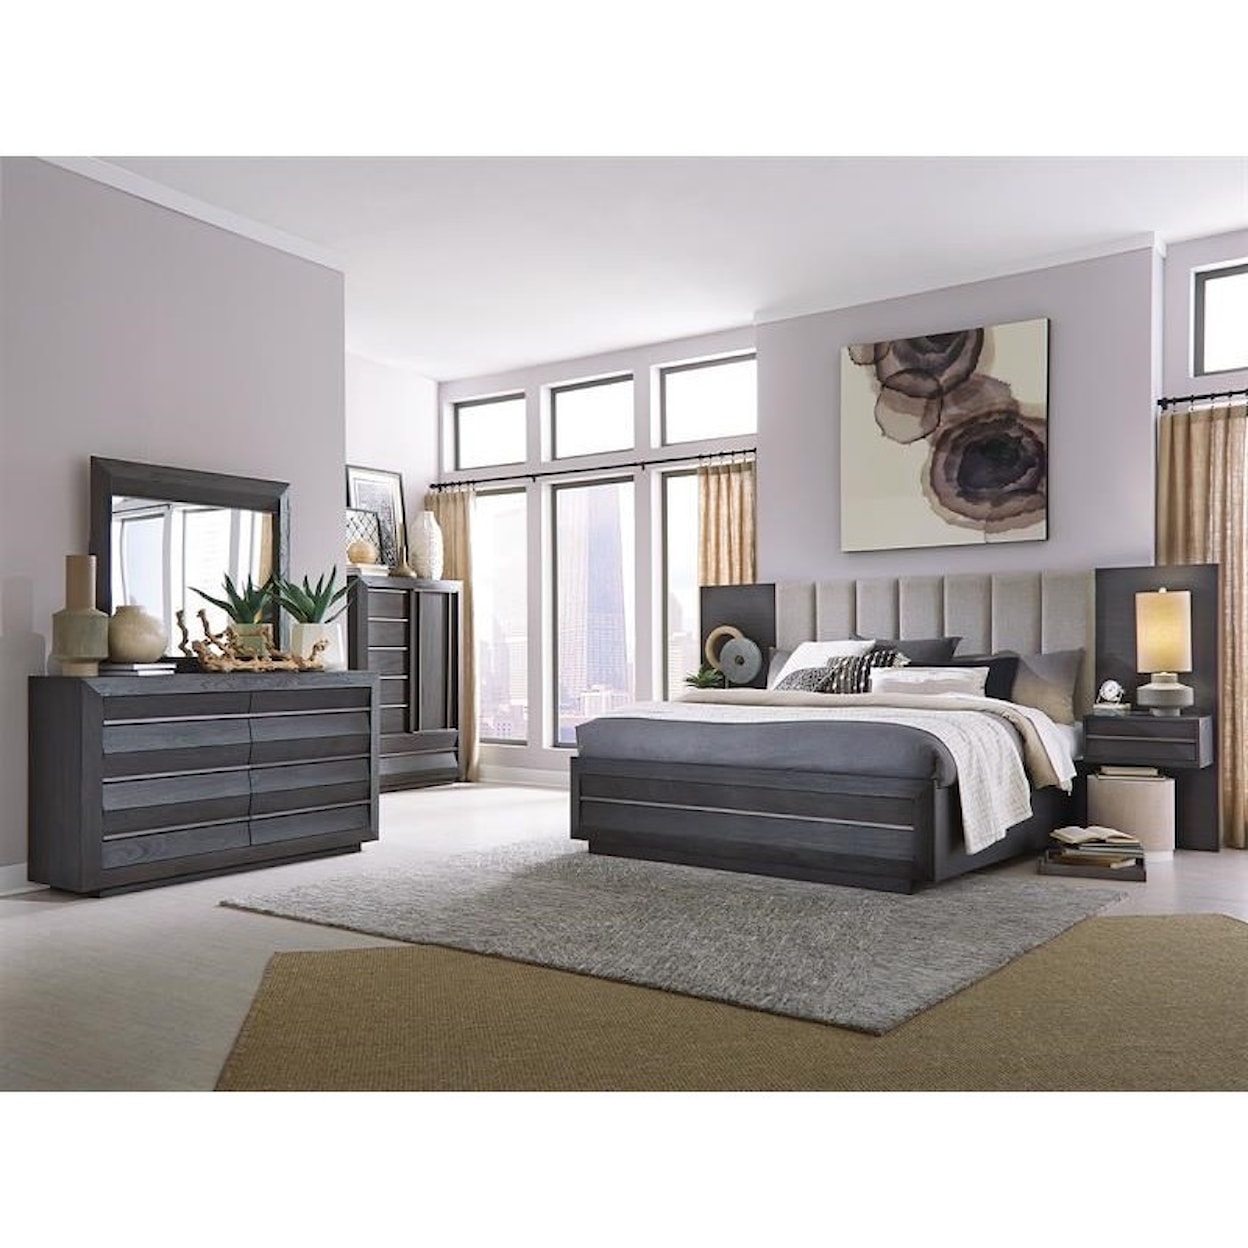 Magnussen Home Wentworth Village Bedroom California King Wall Upholstered Bed